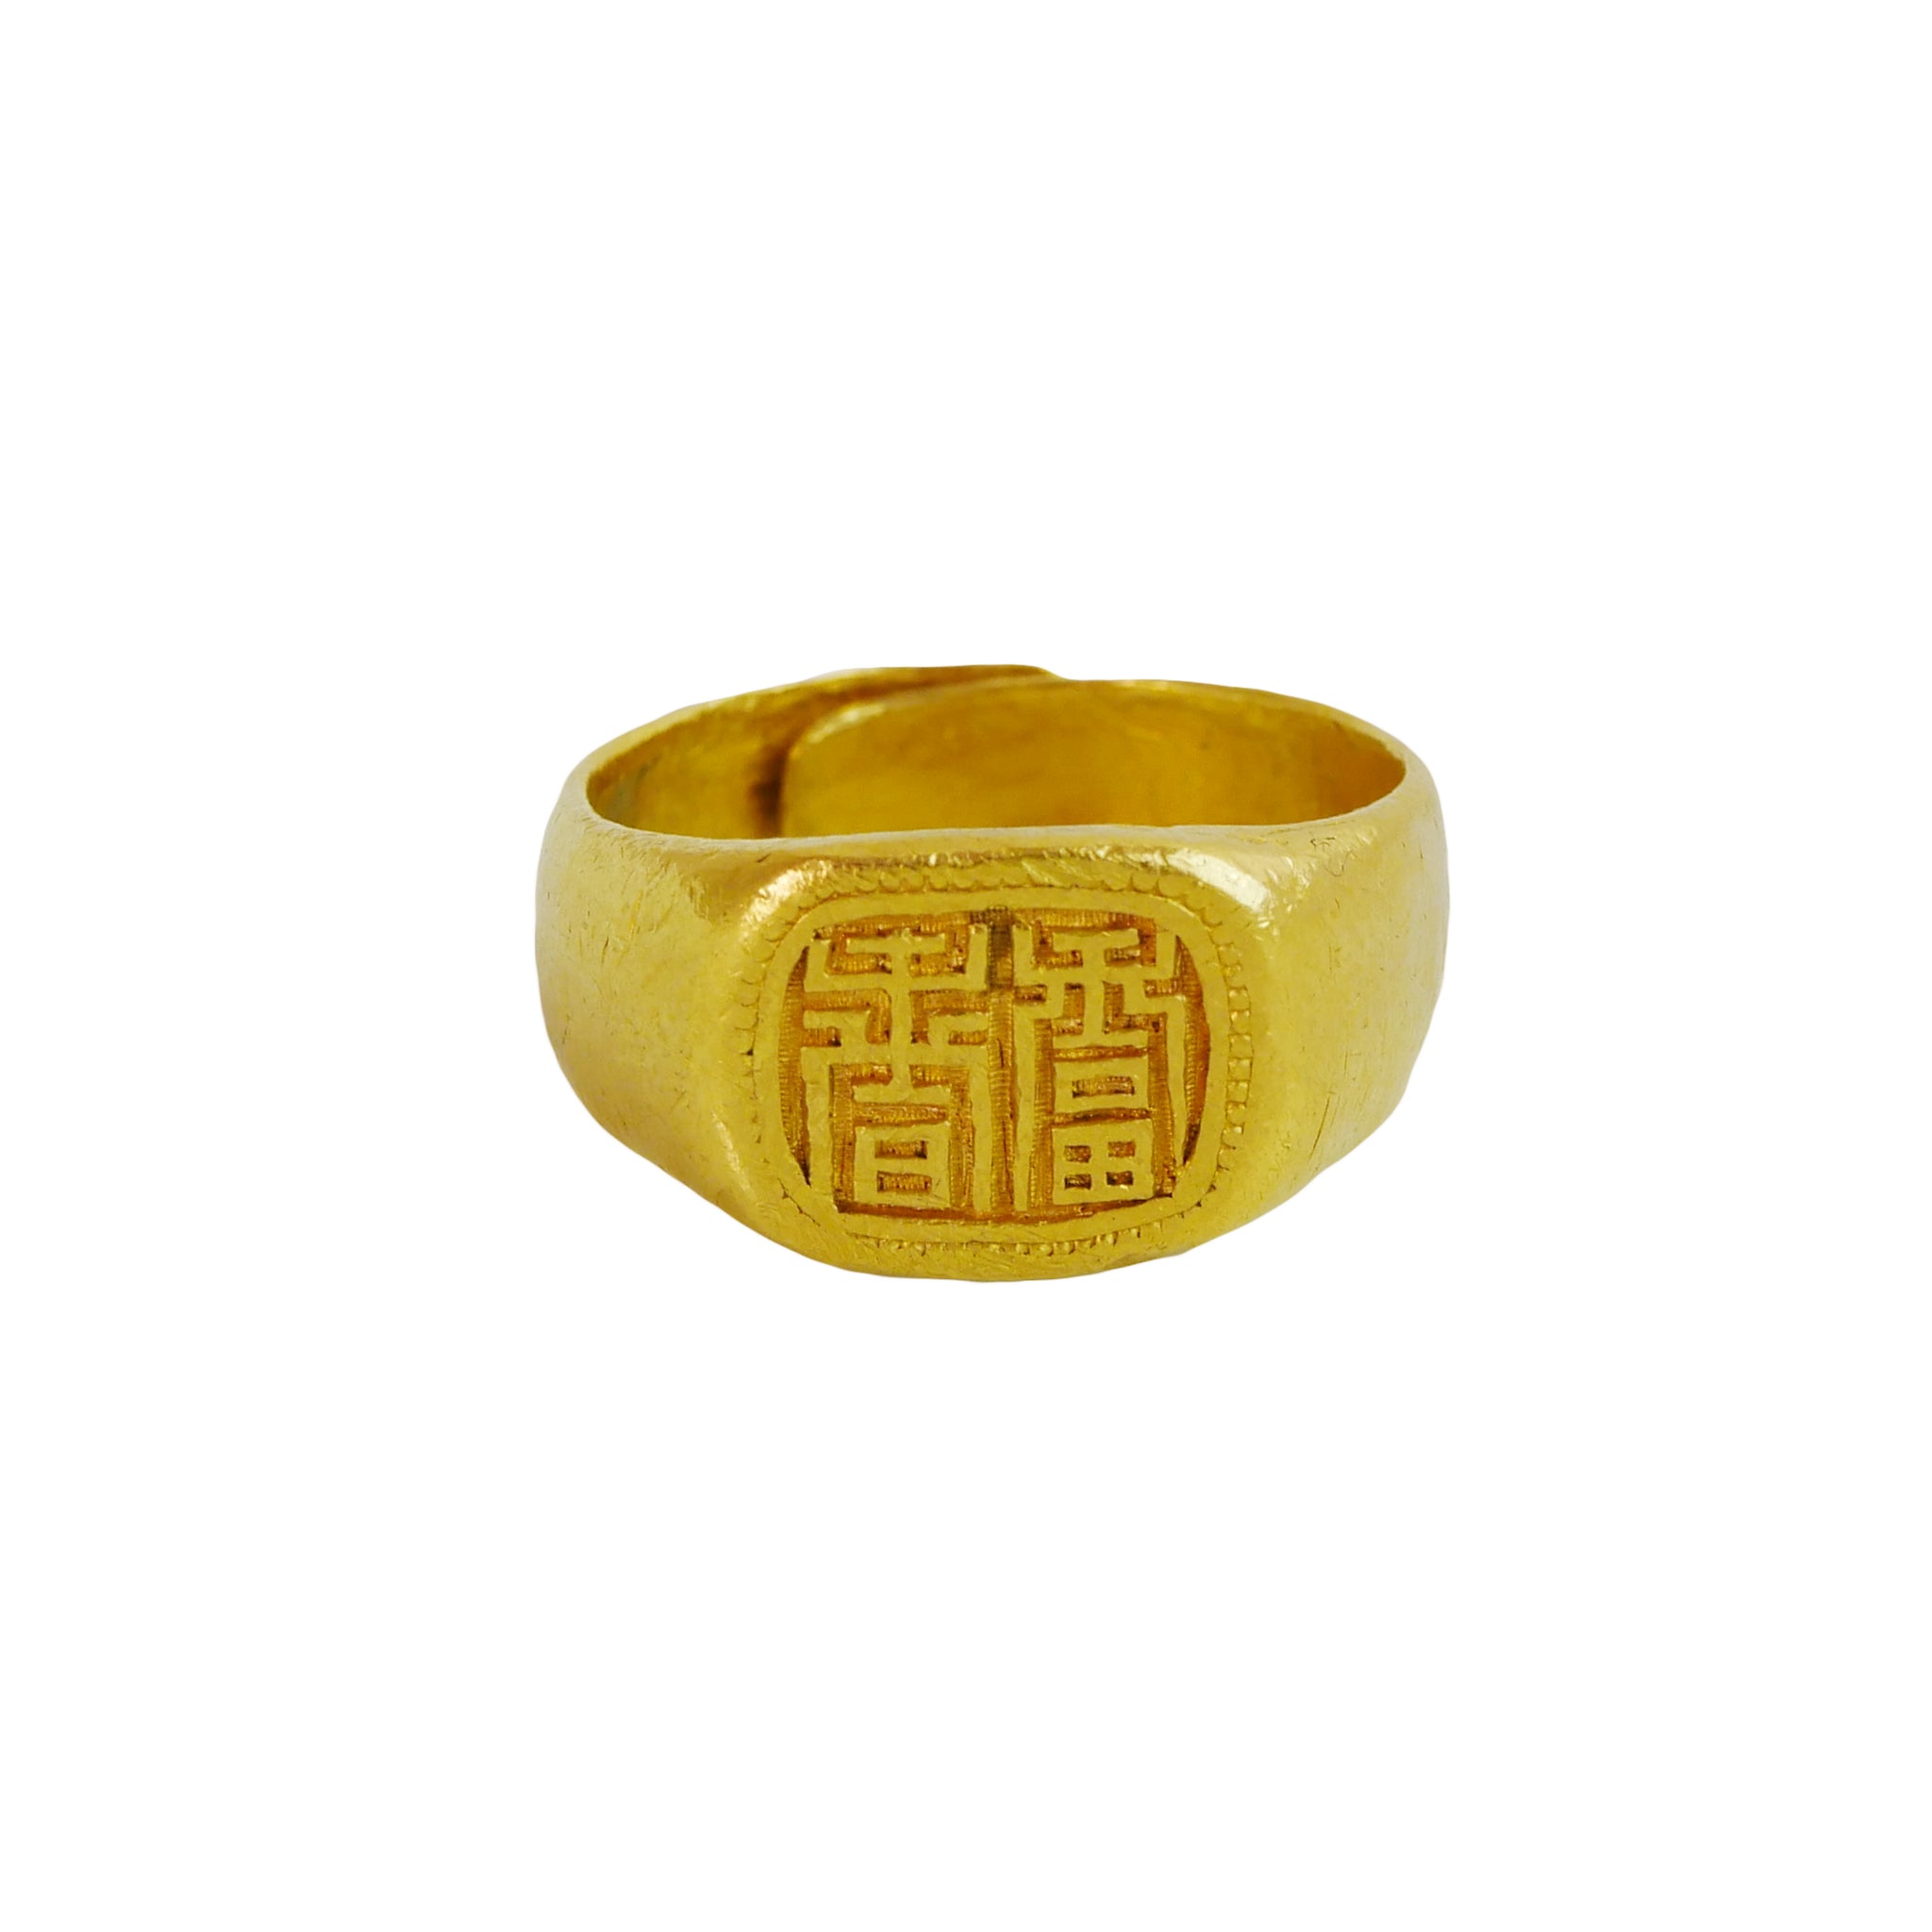 DOUBLE HAPPINESS SYMBOL GOLD RING